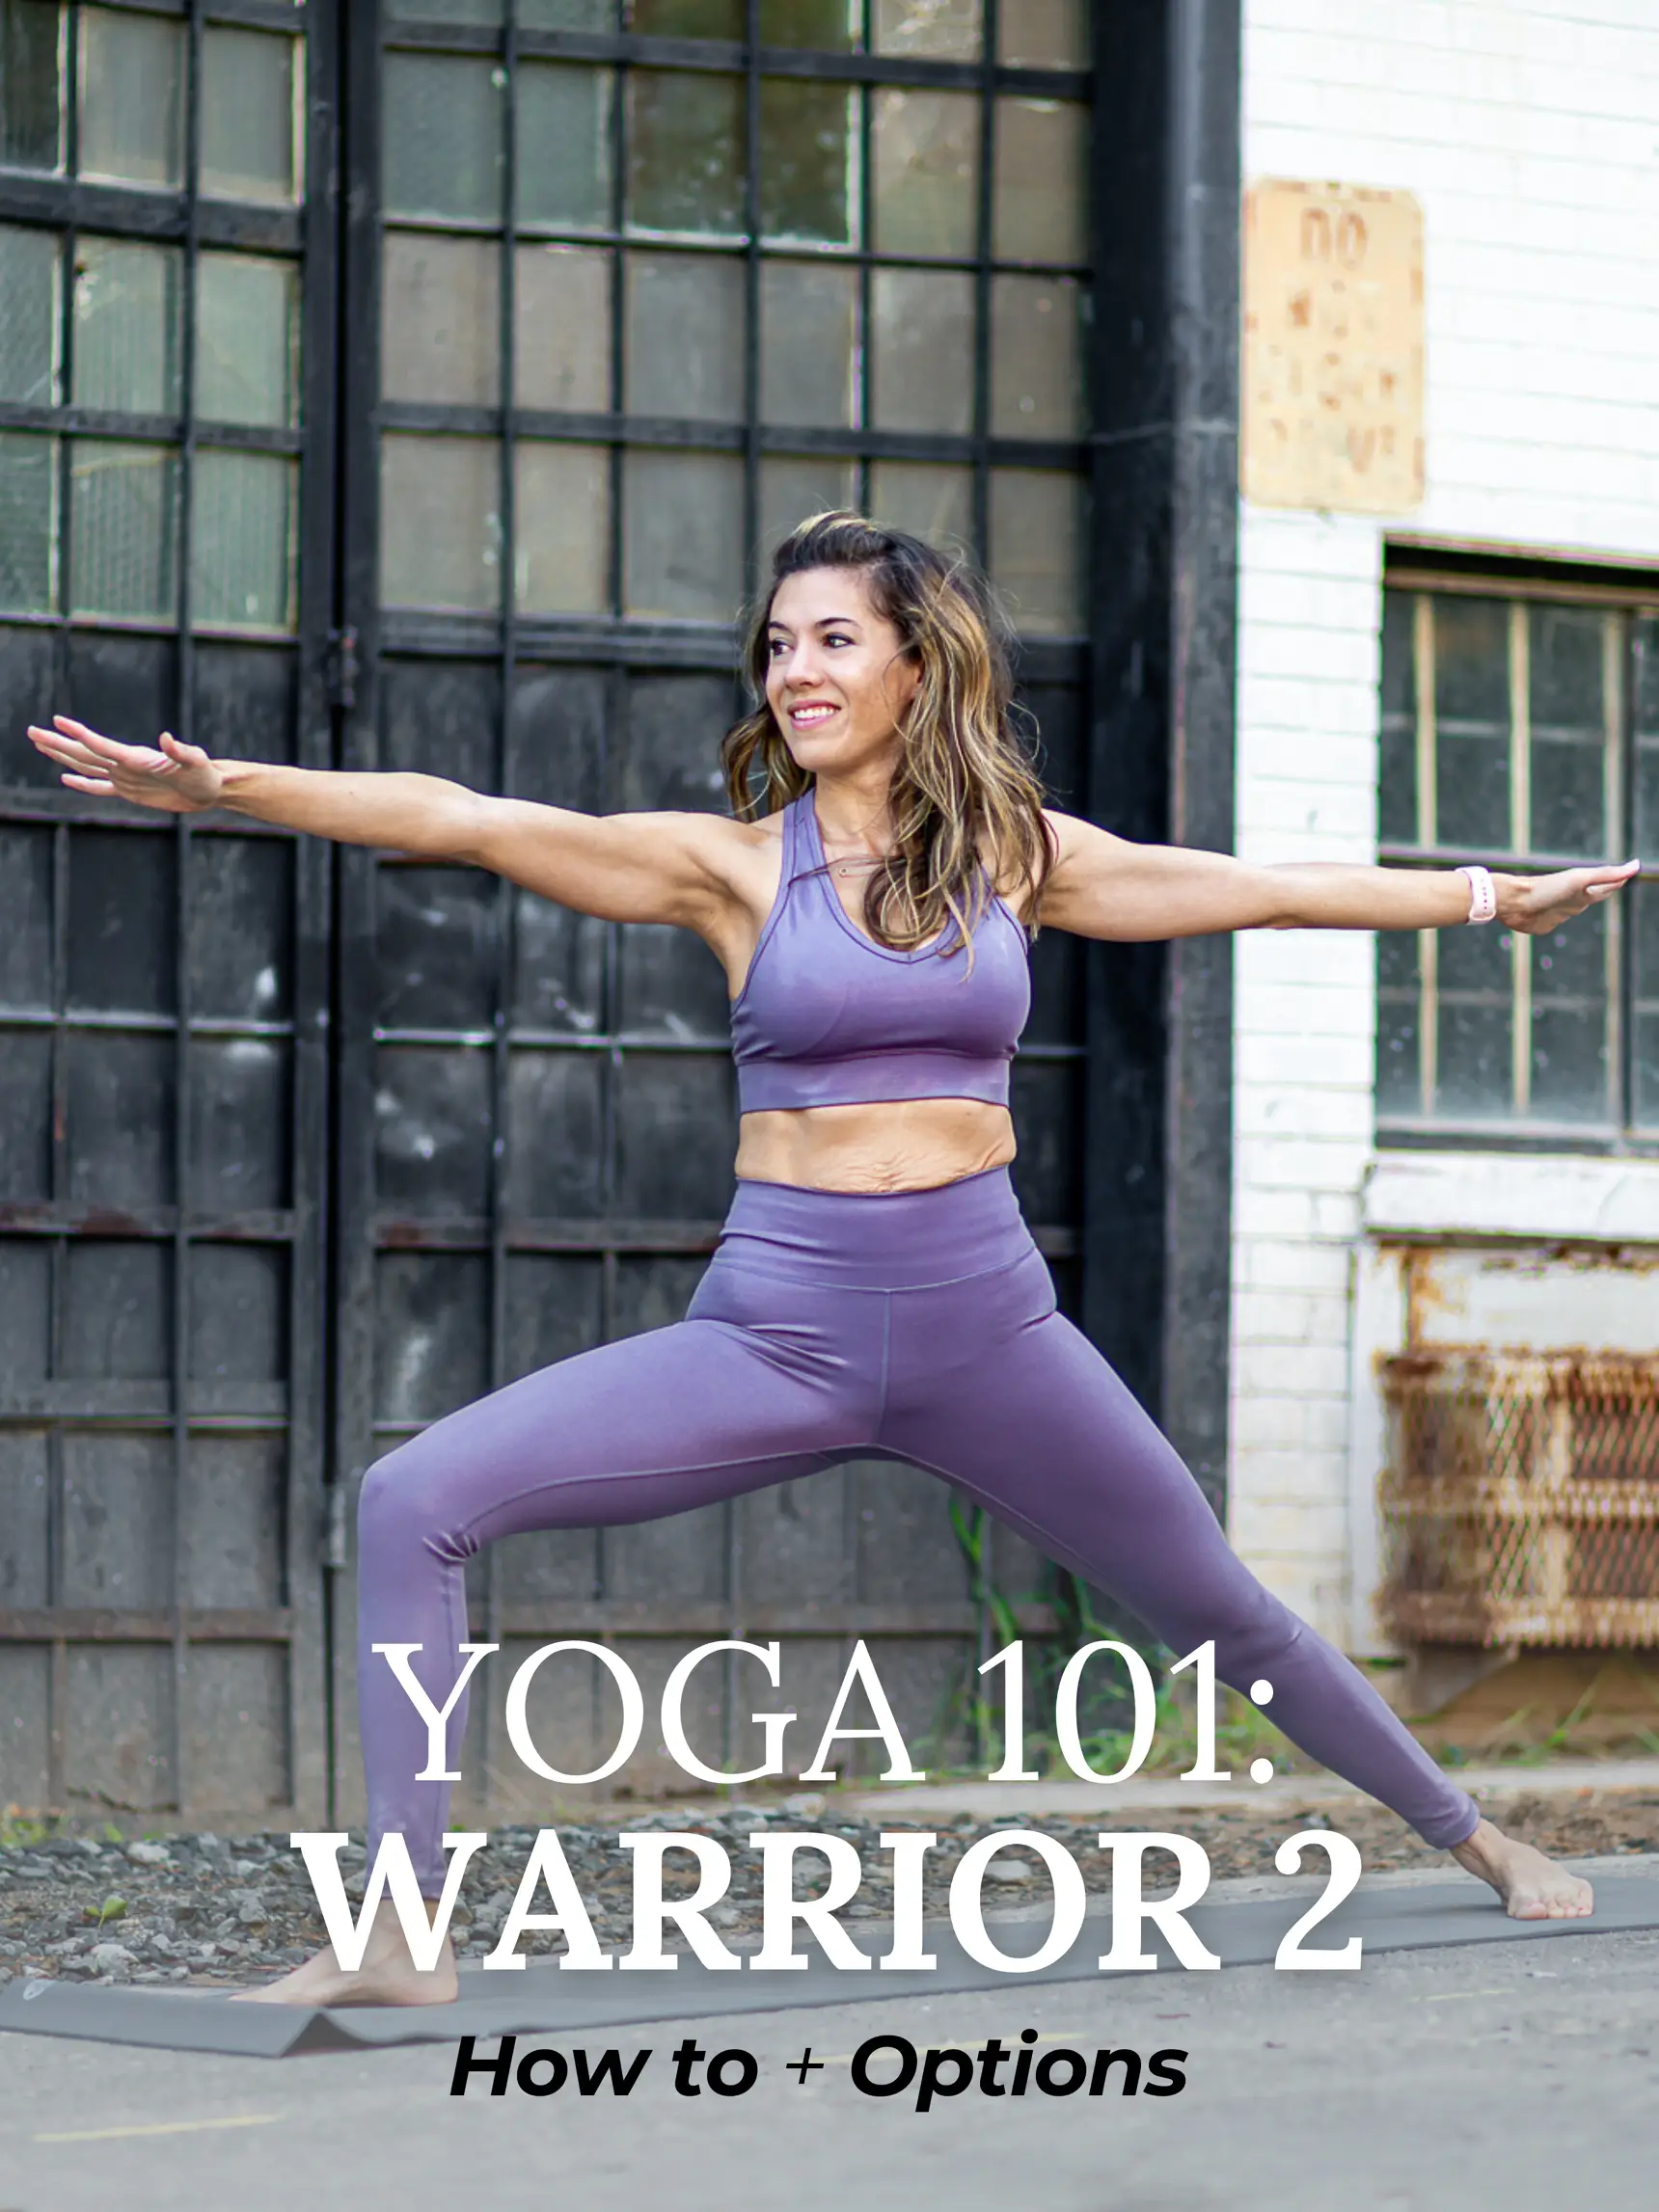 𝚆𝚊𝚛𝚛𝚒𝚘𝚛 𝟸, Yoga 101: How to + Options 💪, Gallery posted by  JenBellYoga